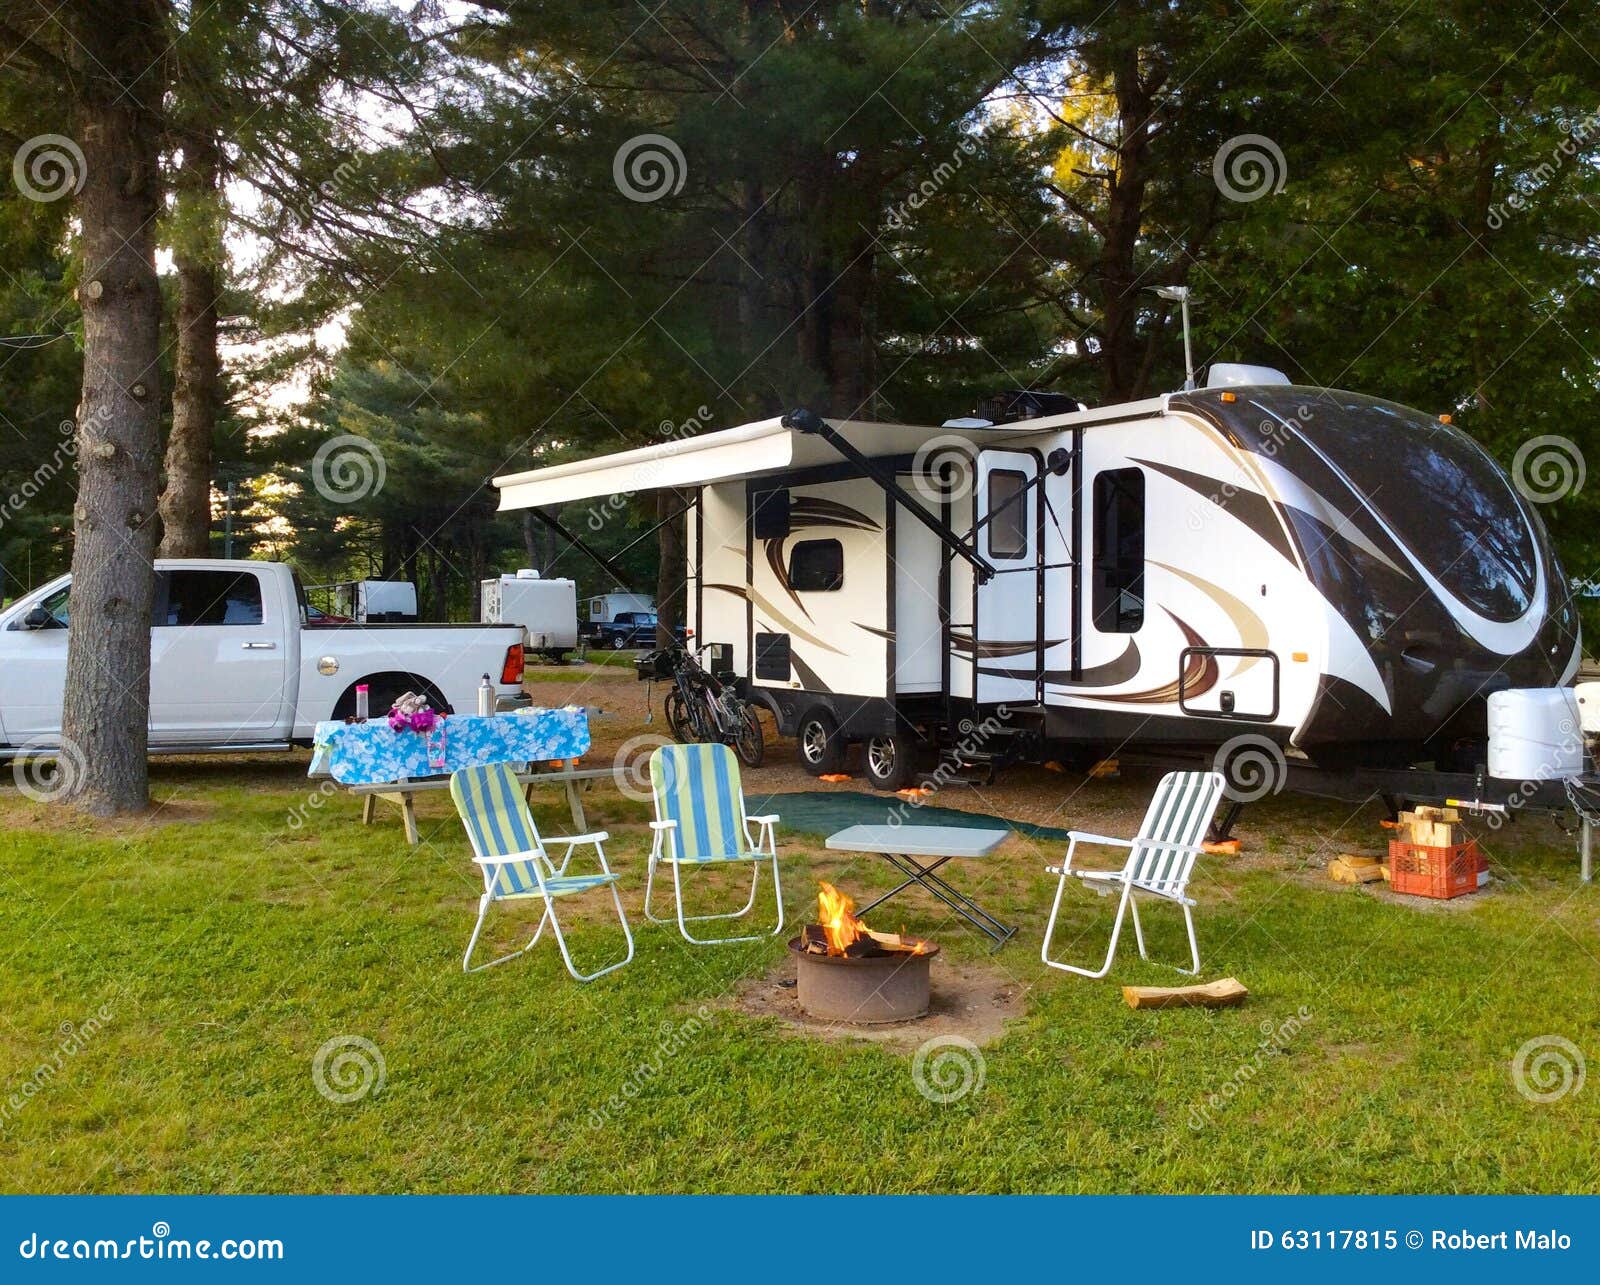 camping on the campground with travel trailer